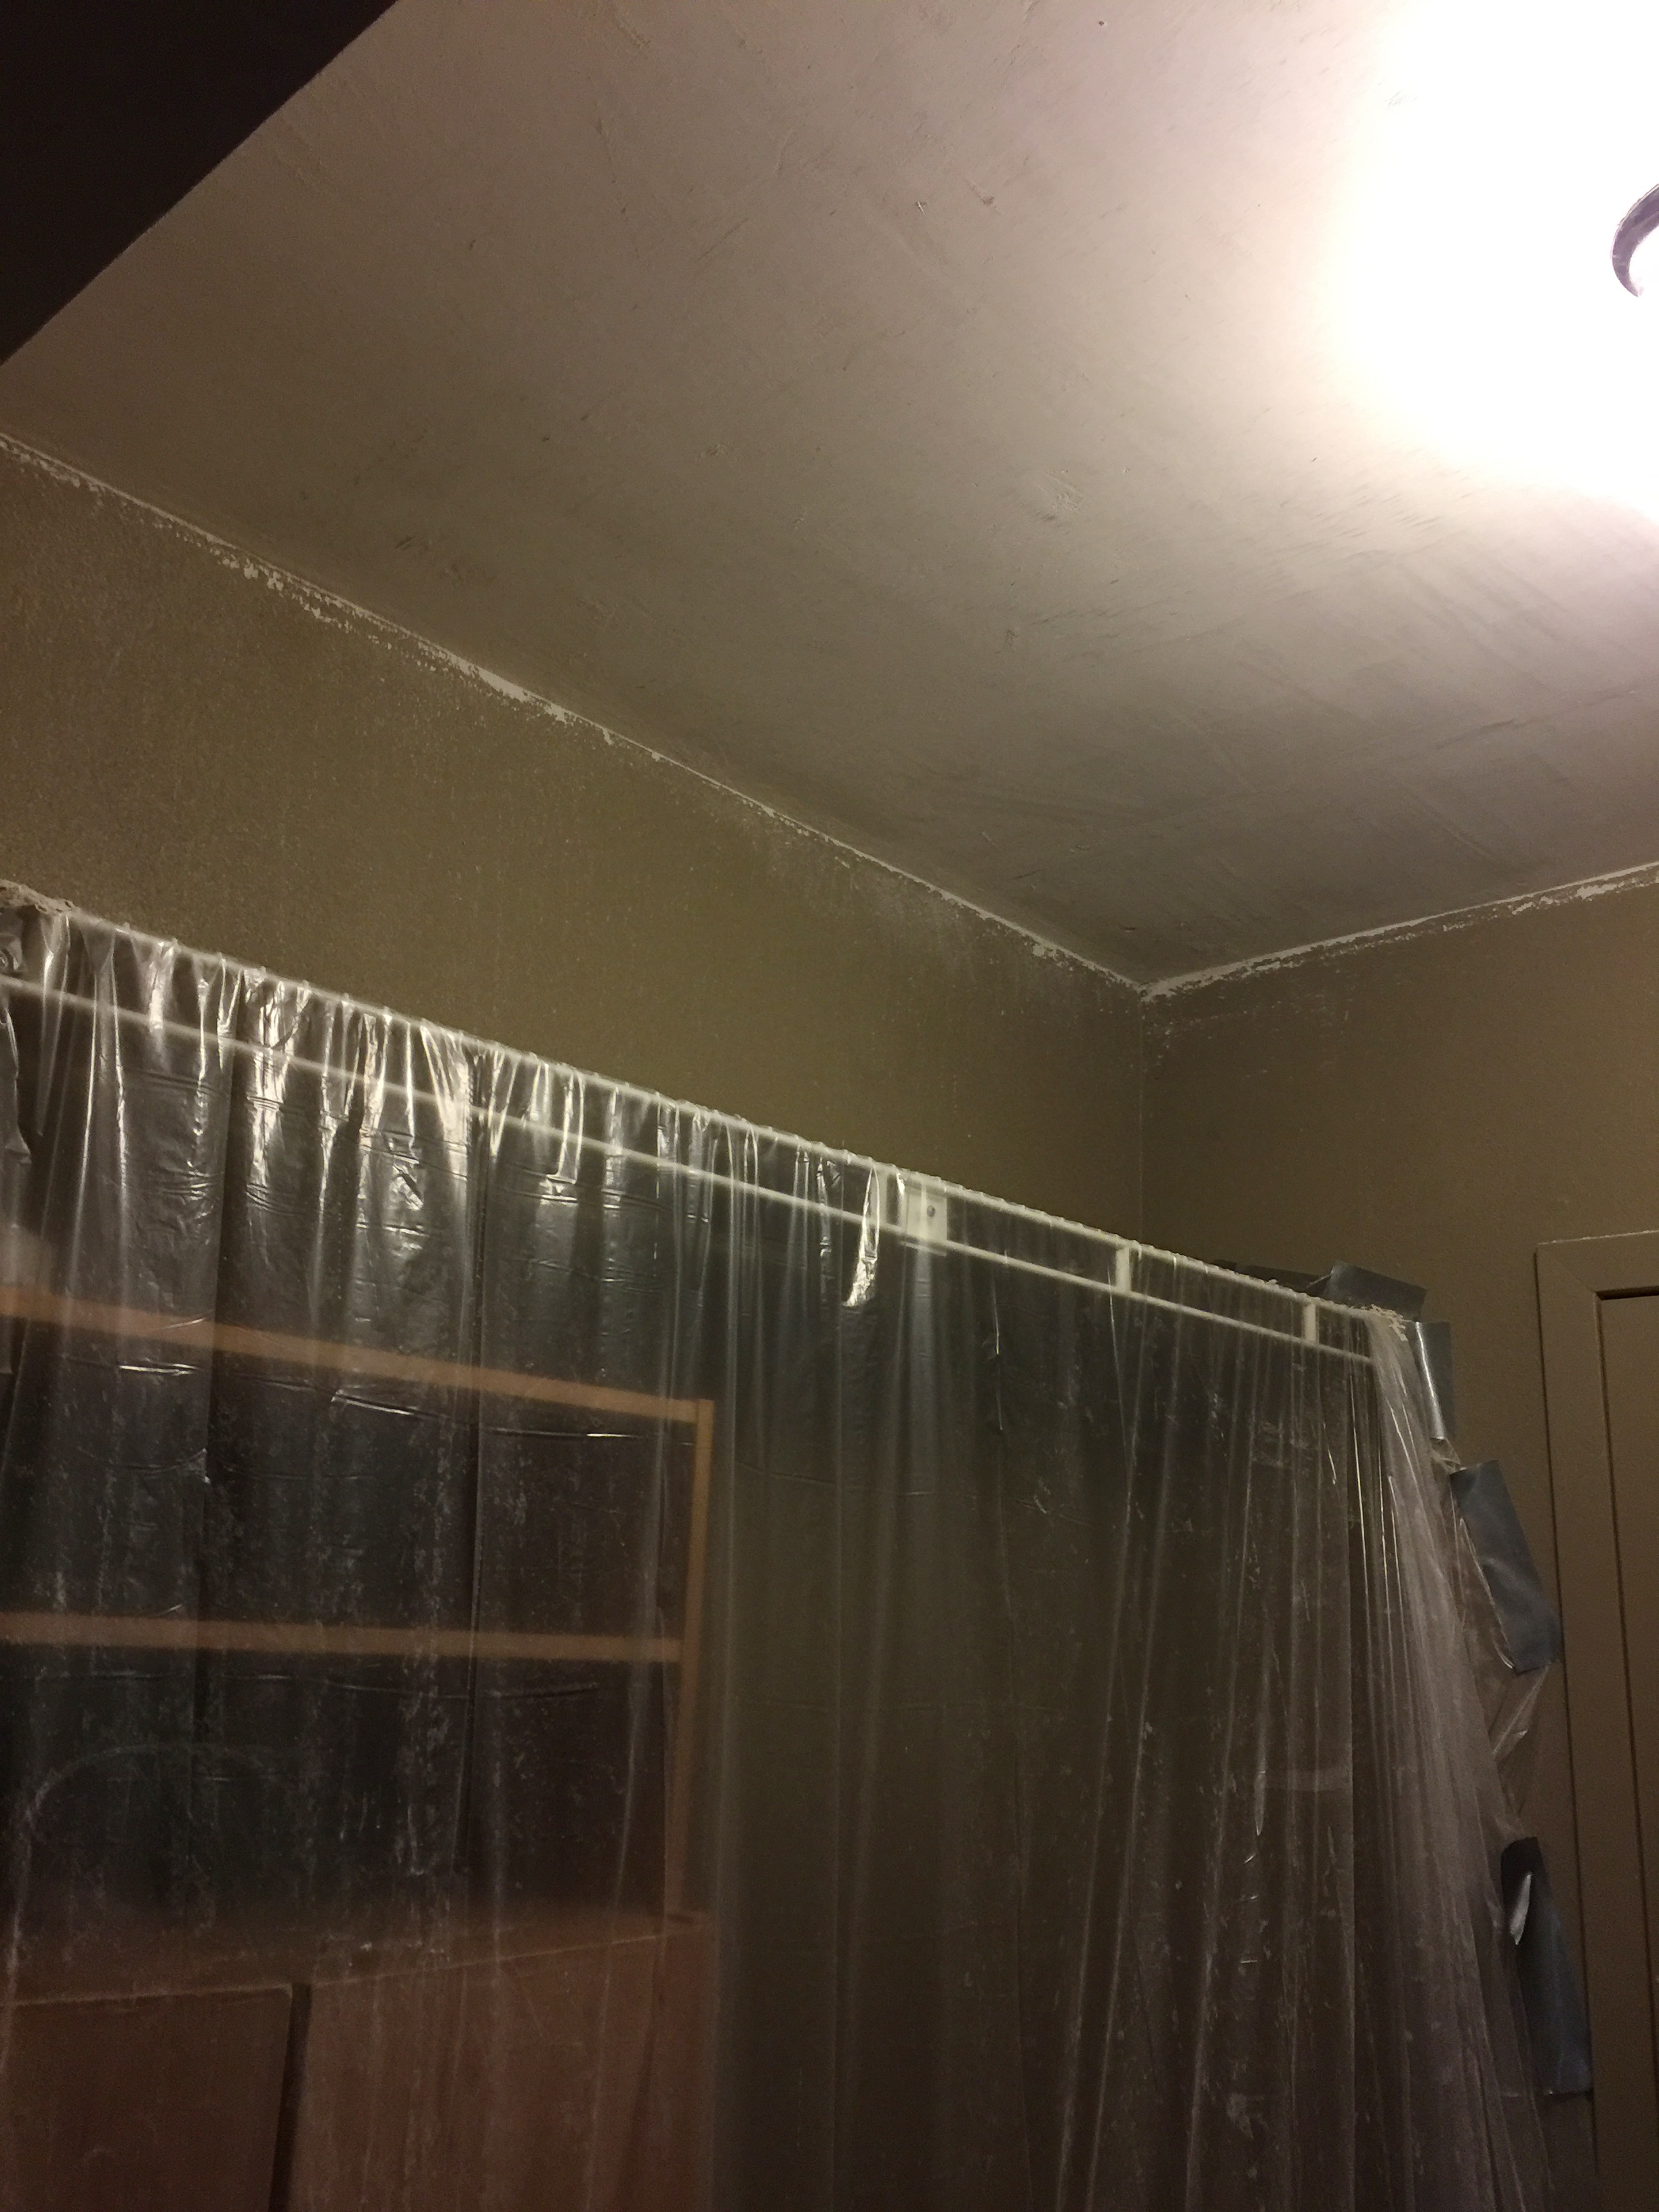 Home Reno Project Update How To Scrape Popcorn Off Ceilings With